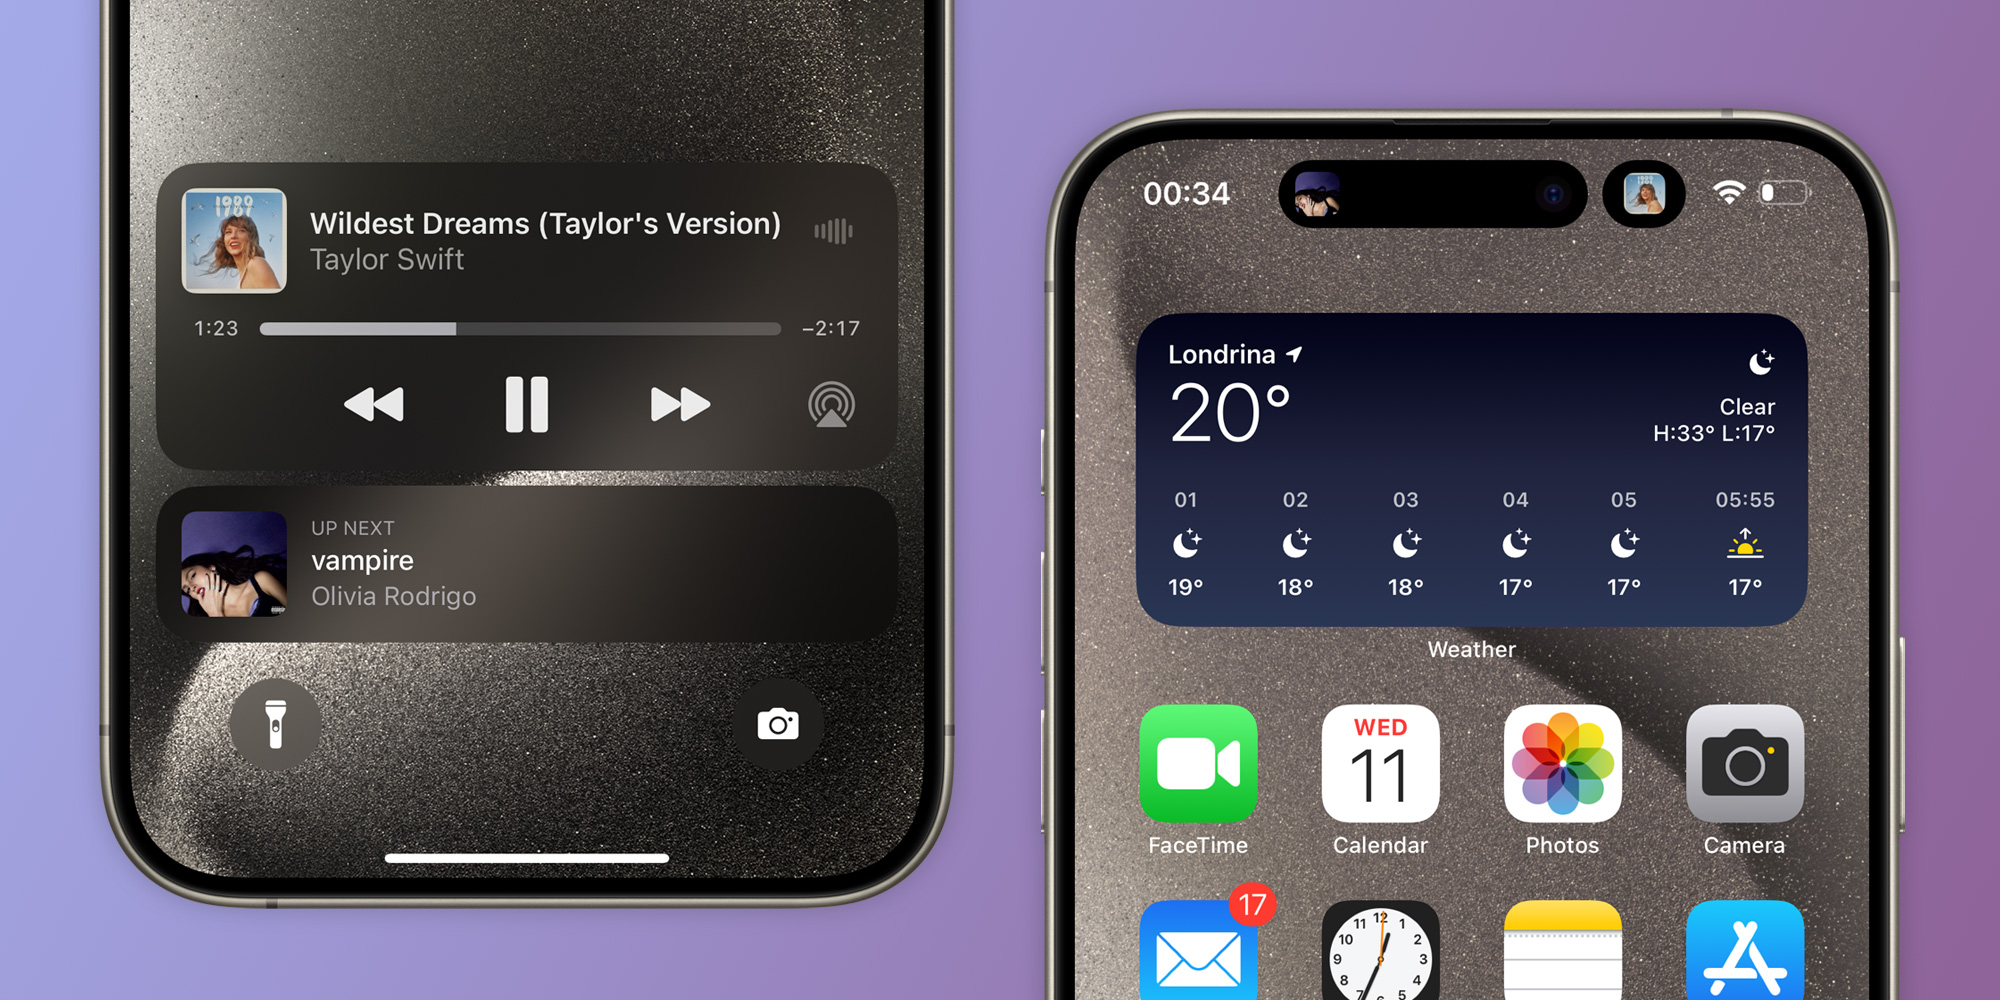 LivePod is an iOS app that turns your Apple Music Up Next queue into a Live Activity